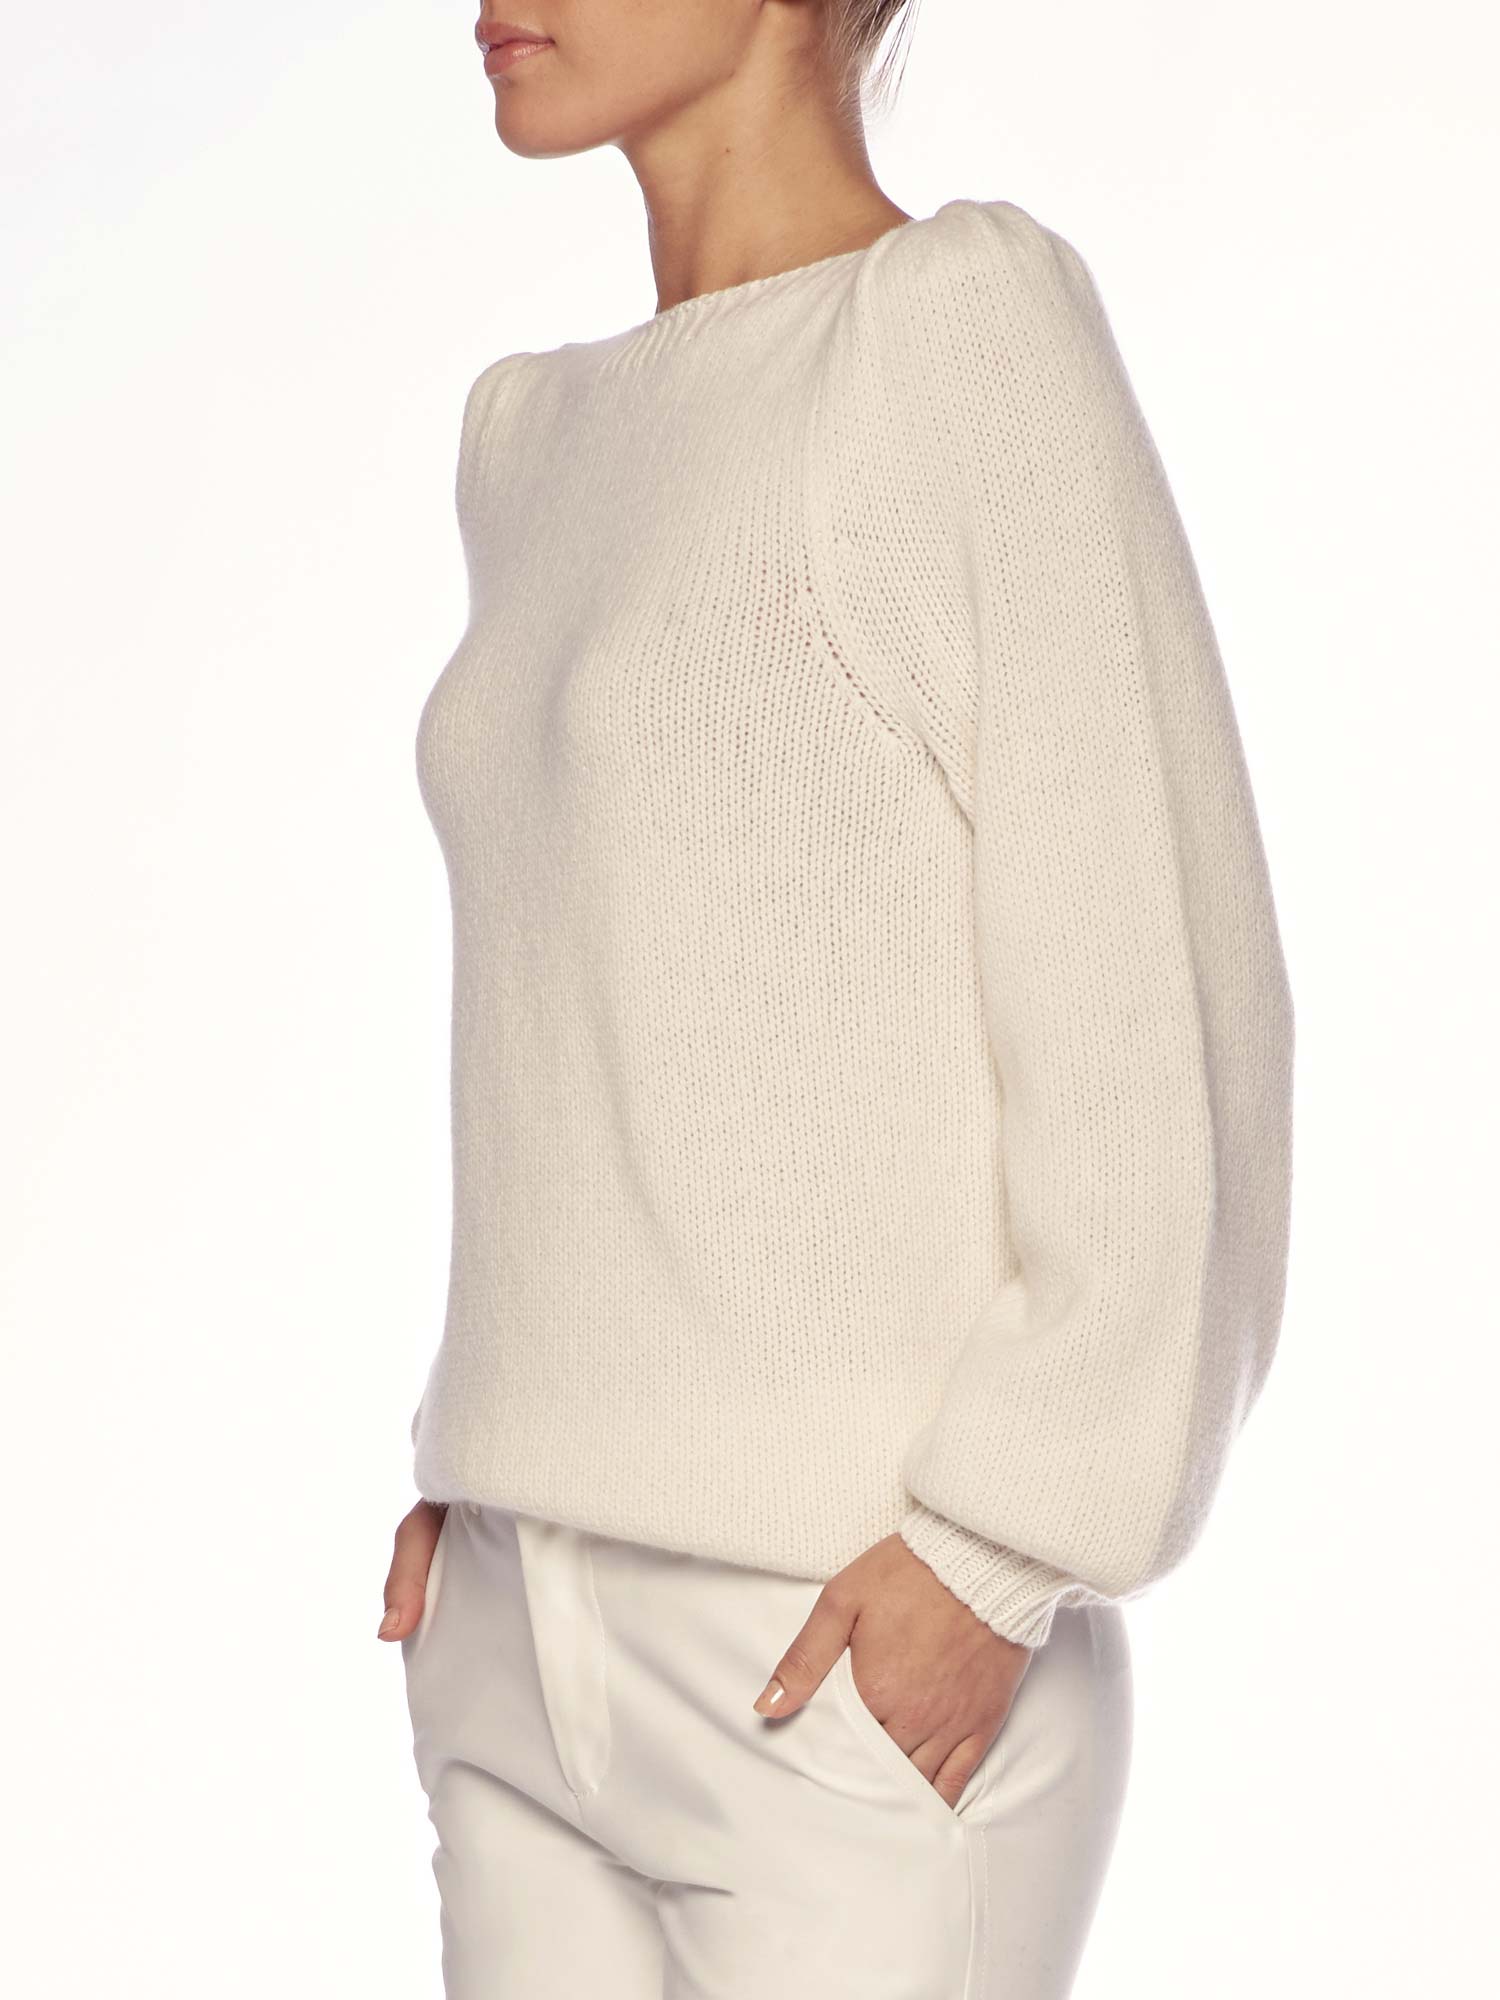 Delphi cashmere boatneck white sweater side view